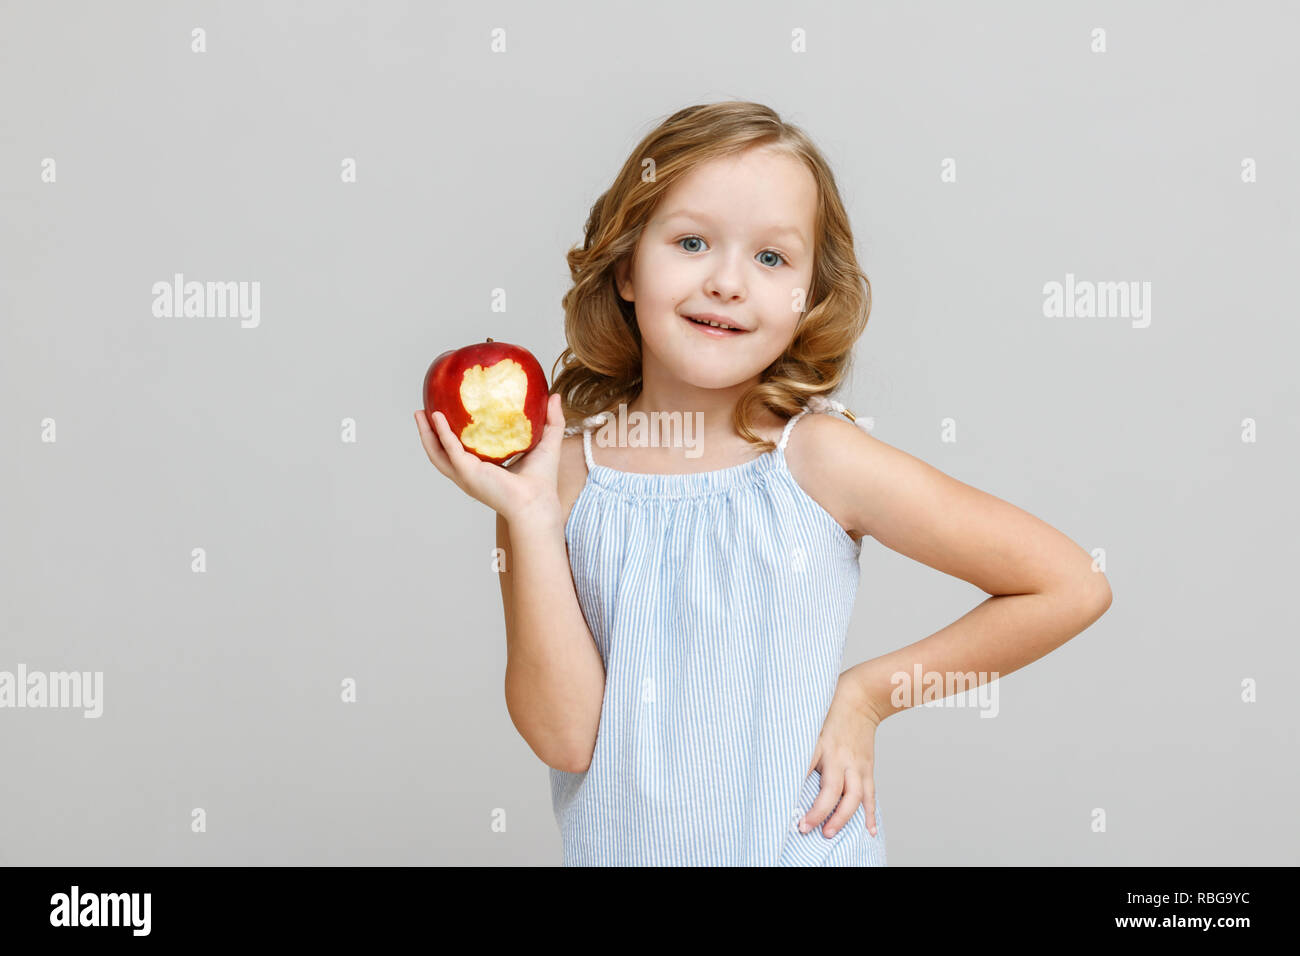 Portrait of a happy smiling little blonde child girl with a bitten red apple on a gray background Stock Photo